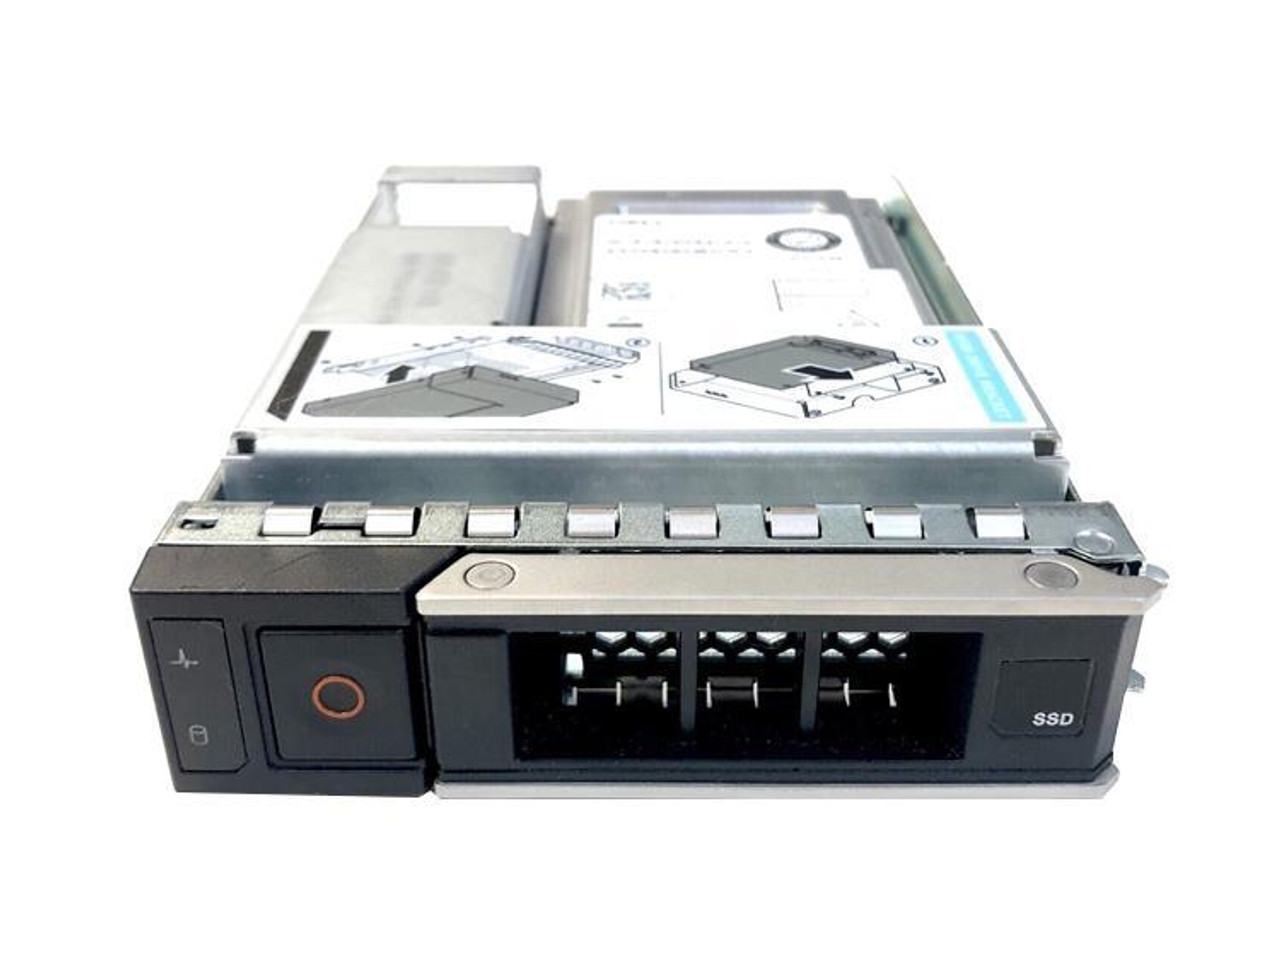 Dell 960GB SAS 12Gbps Hot Swap Read Intensive 2.5-inch Internal Solid State Drive (SSD) with 3.5-inch Hybrid Carrier